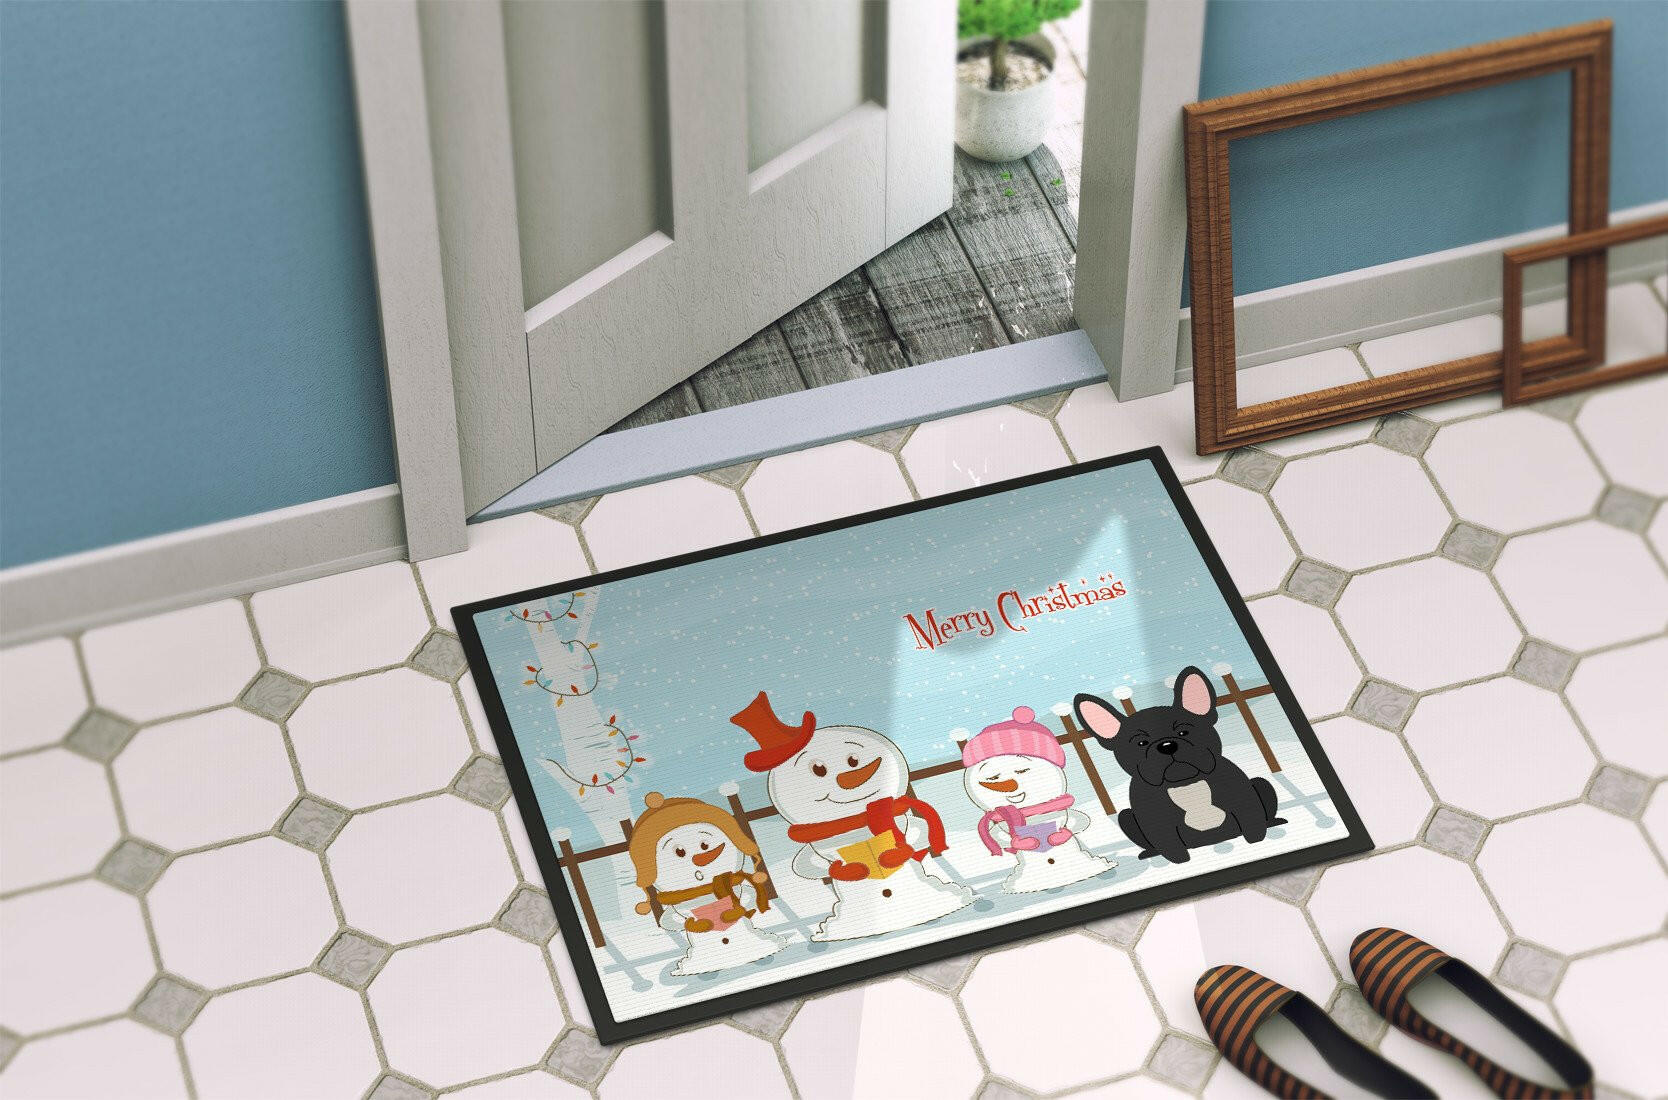 Merry Christmas Carolers French Bulldog Black Indoor or Outdoor Mat 24x36 BB2345JMAT - the-store.com